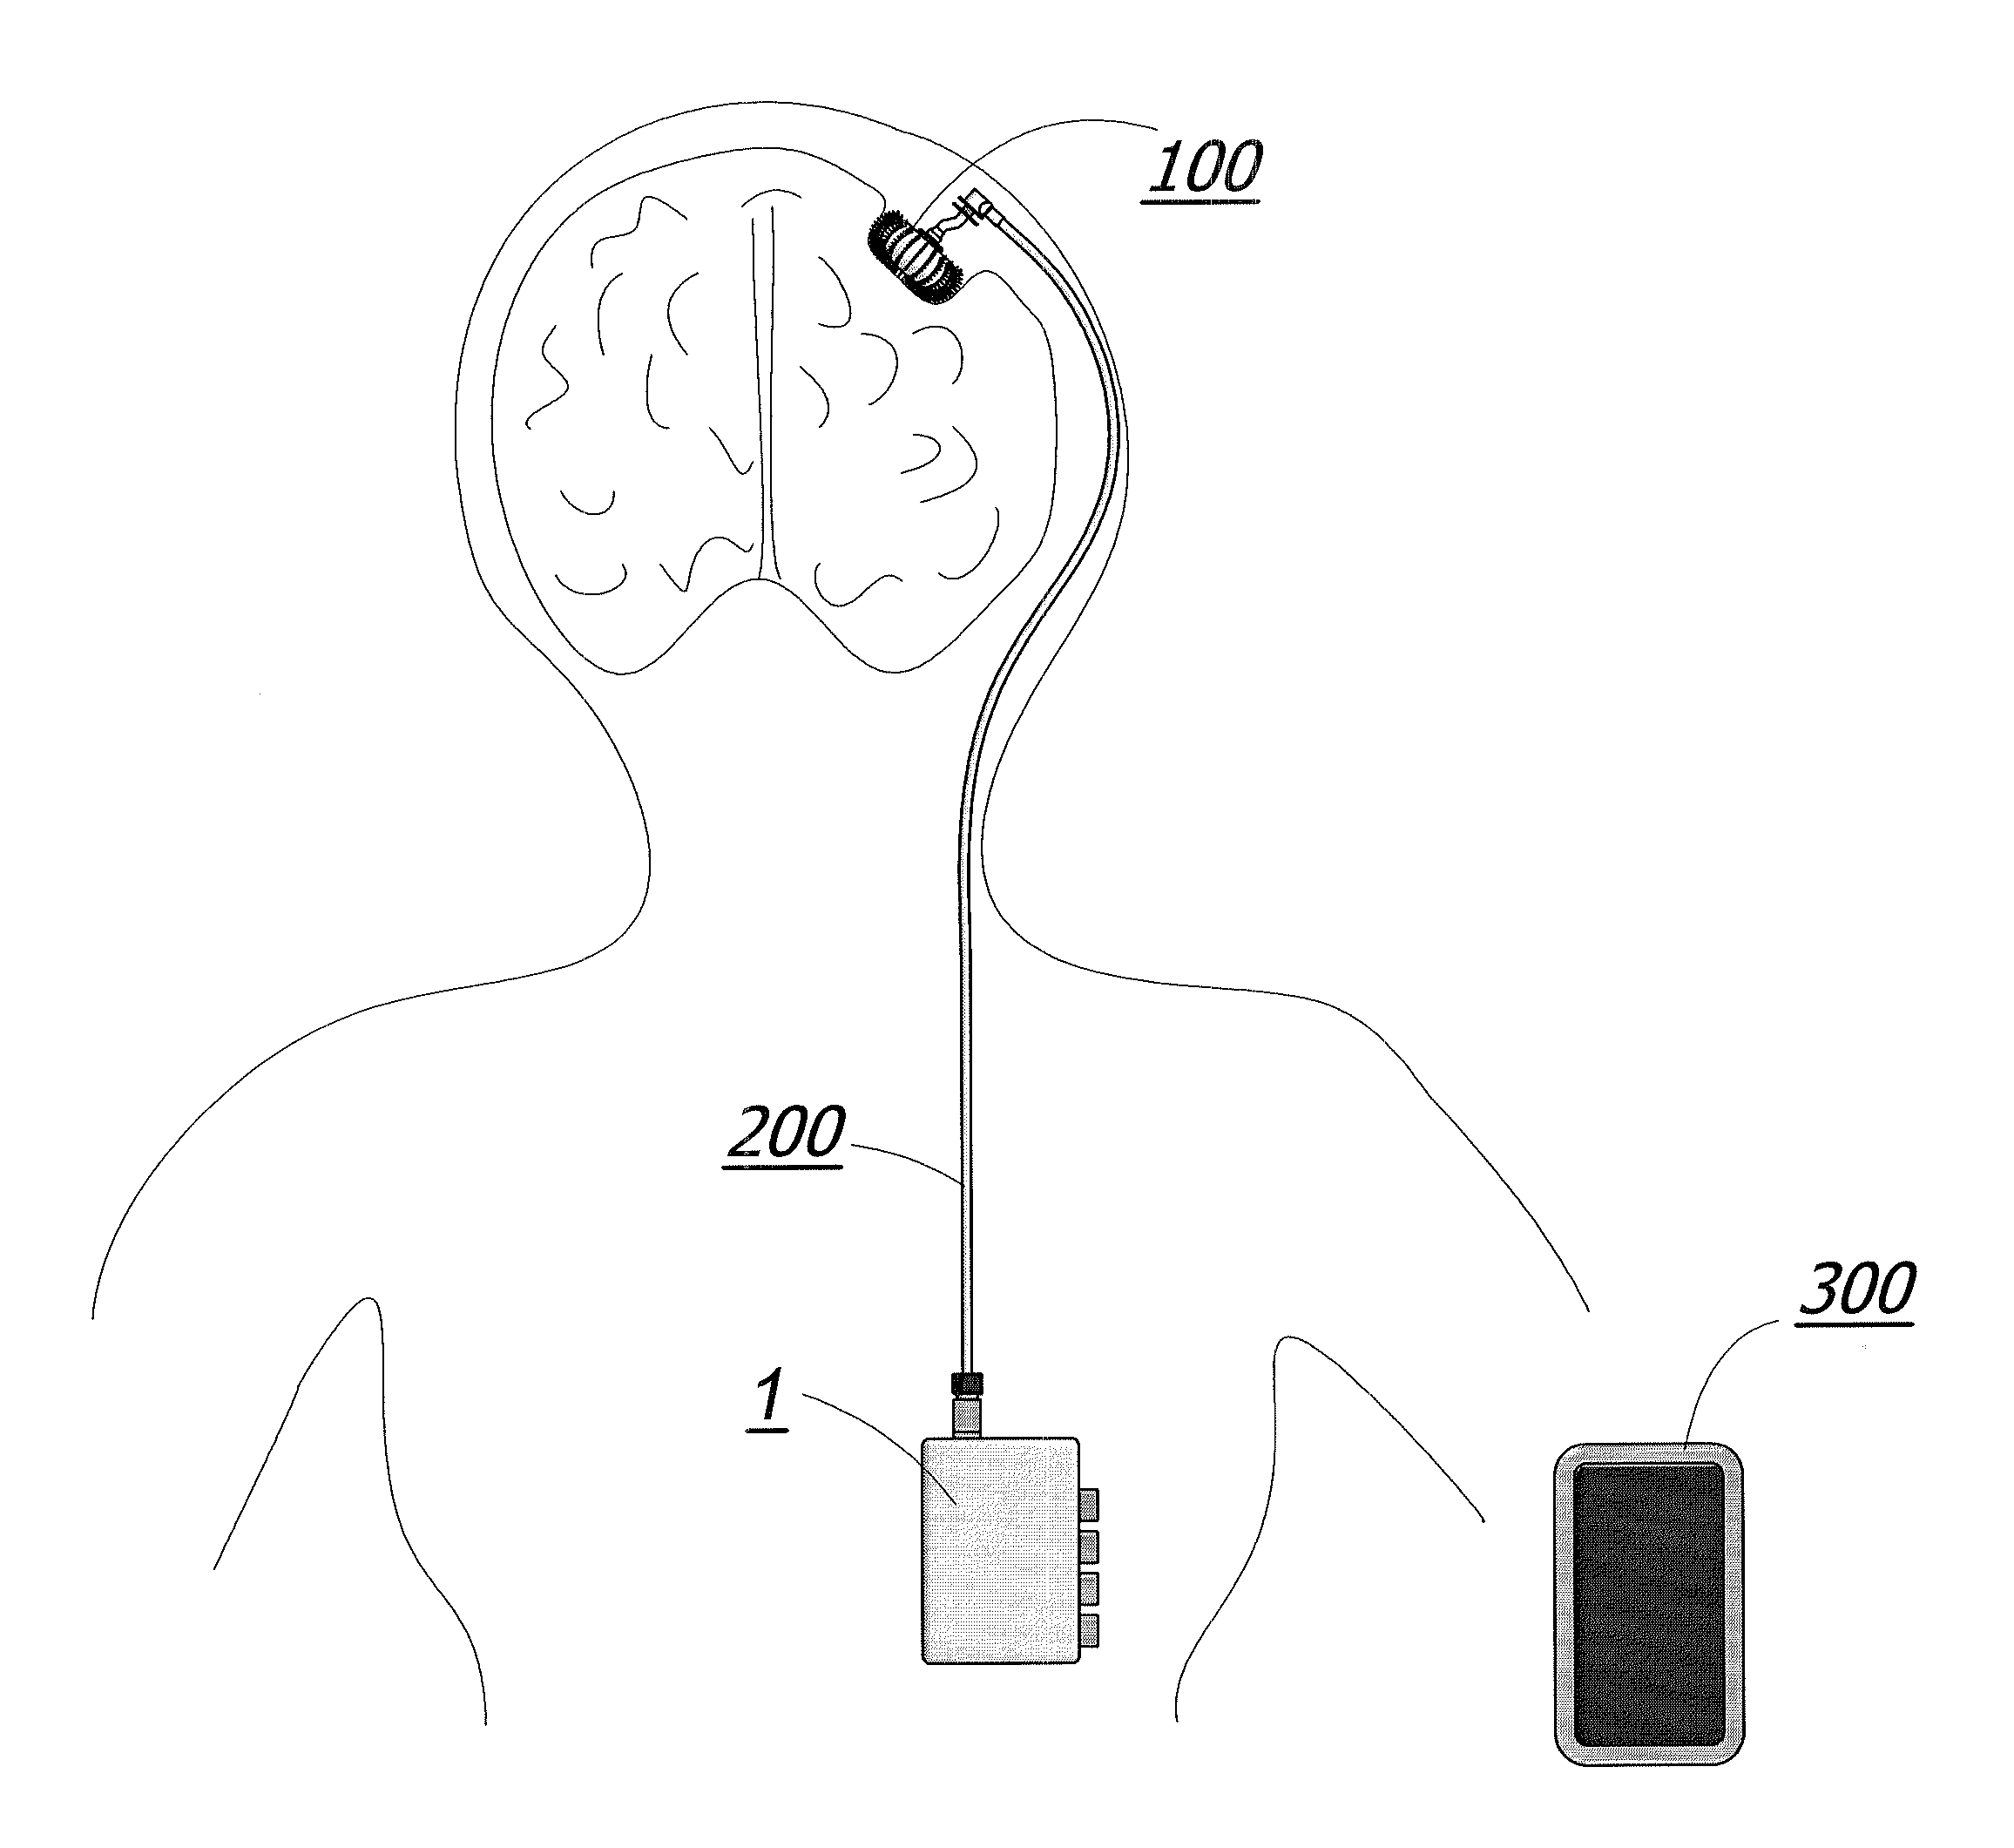 Enhanced method for delivering bevacizumab (avastin) into a brain tumor using an implanted magnetic breather pump